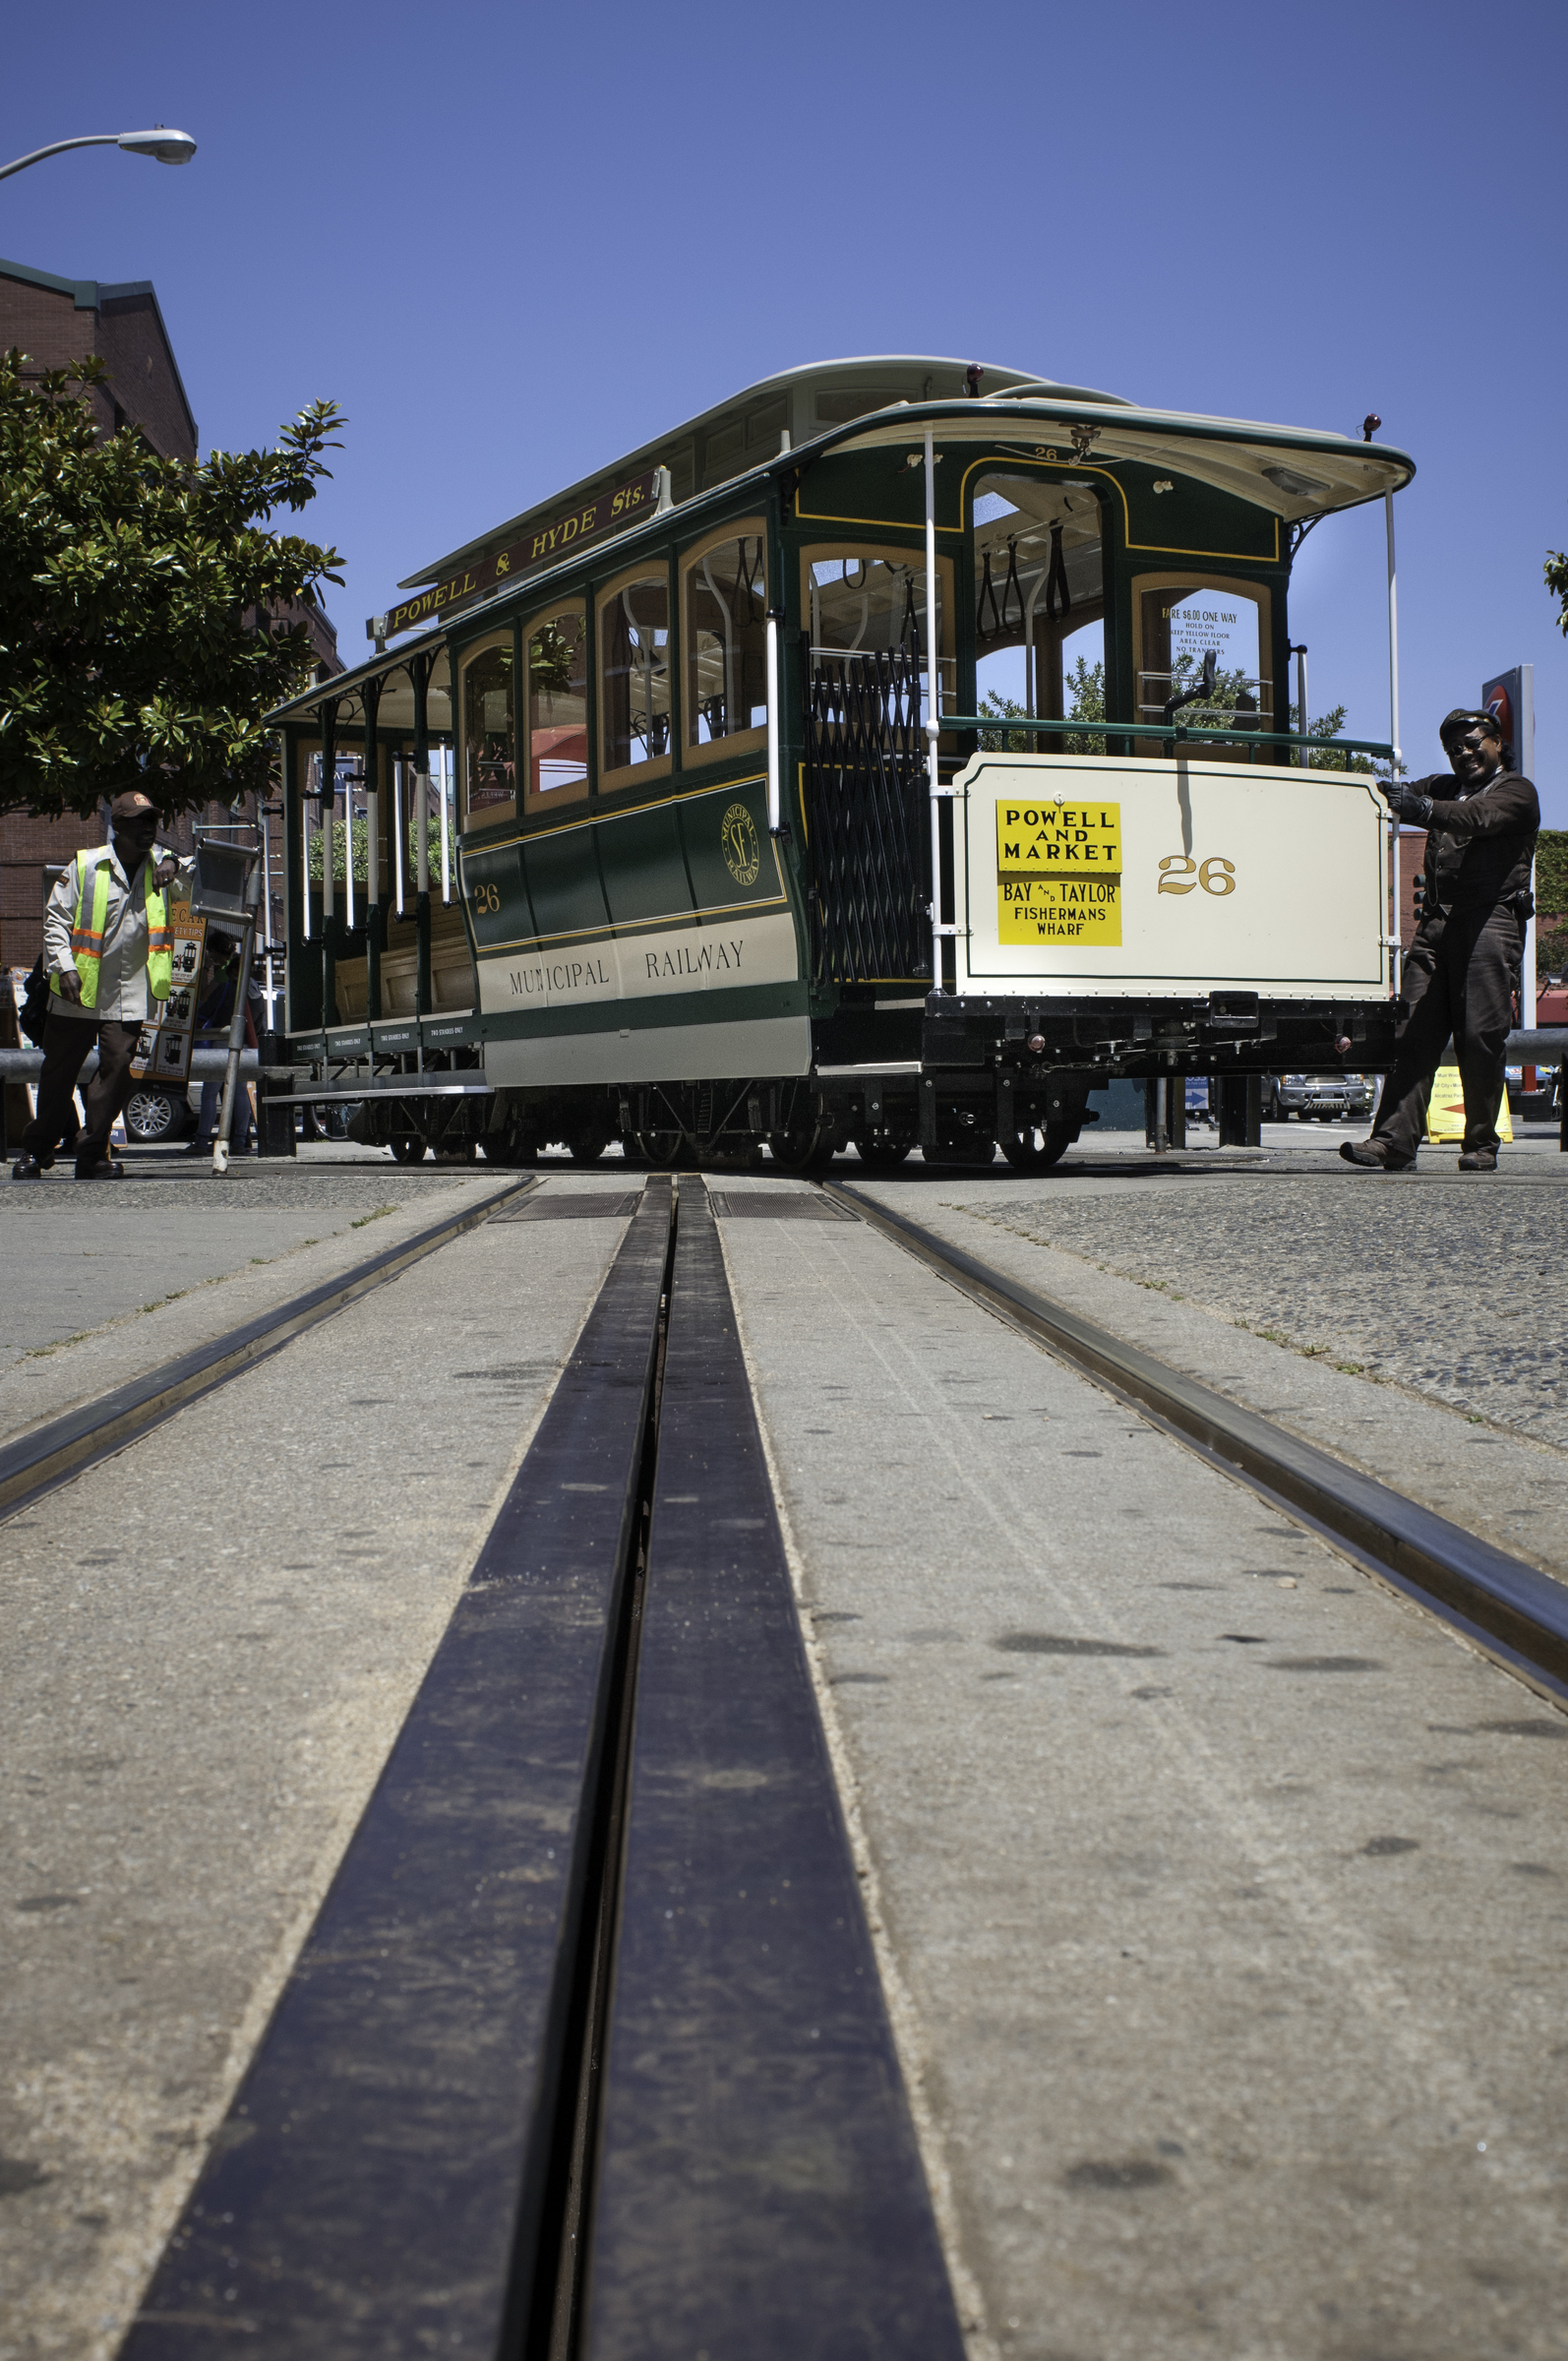 A cream and green cable car is being turned by the gripman and conductor in Muni uniforms. The low-angle shot captures the cable car tracks and slot in the foreground.